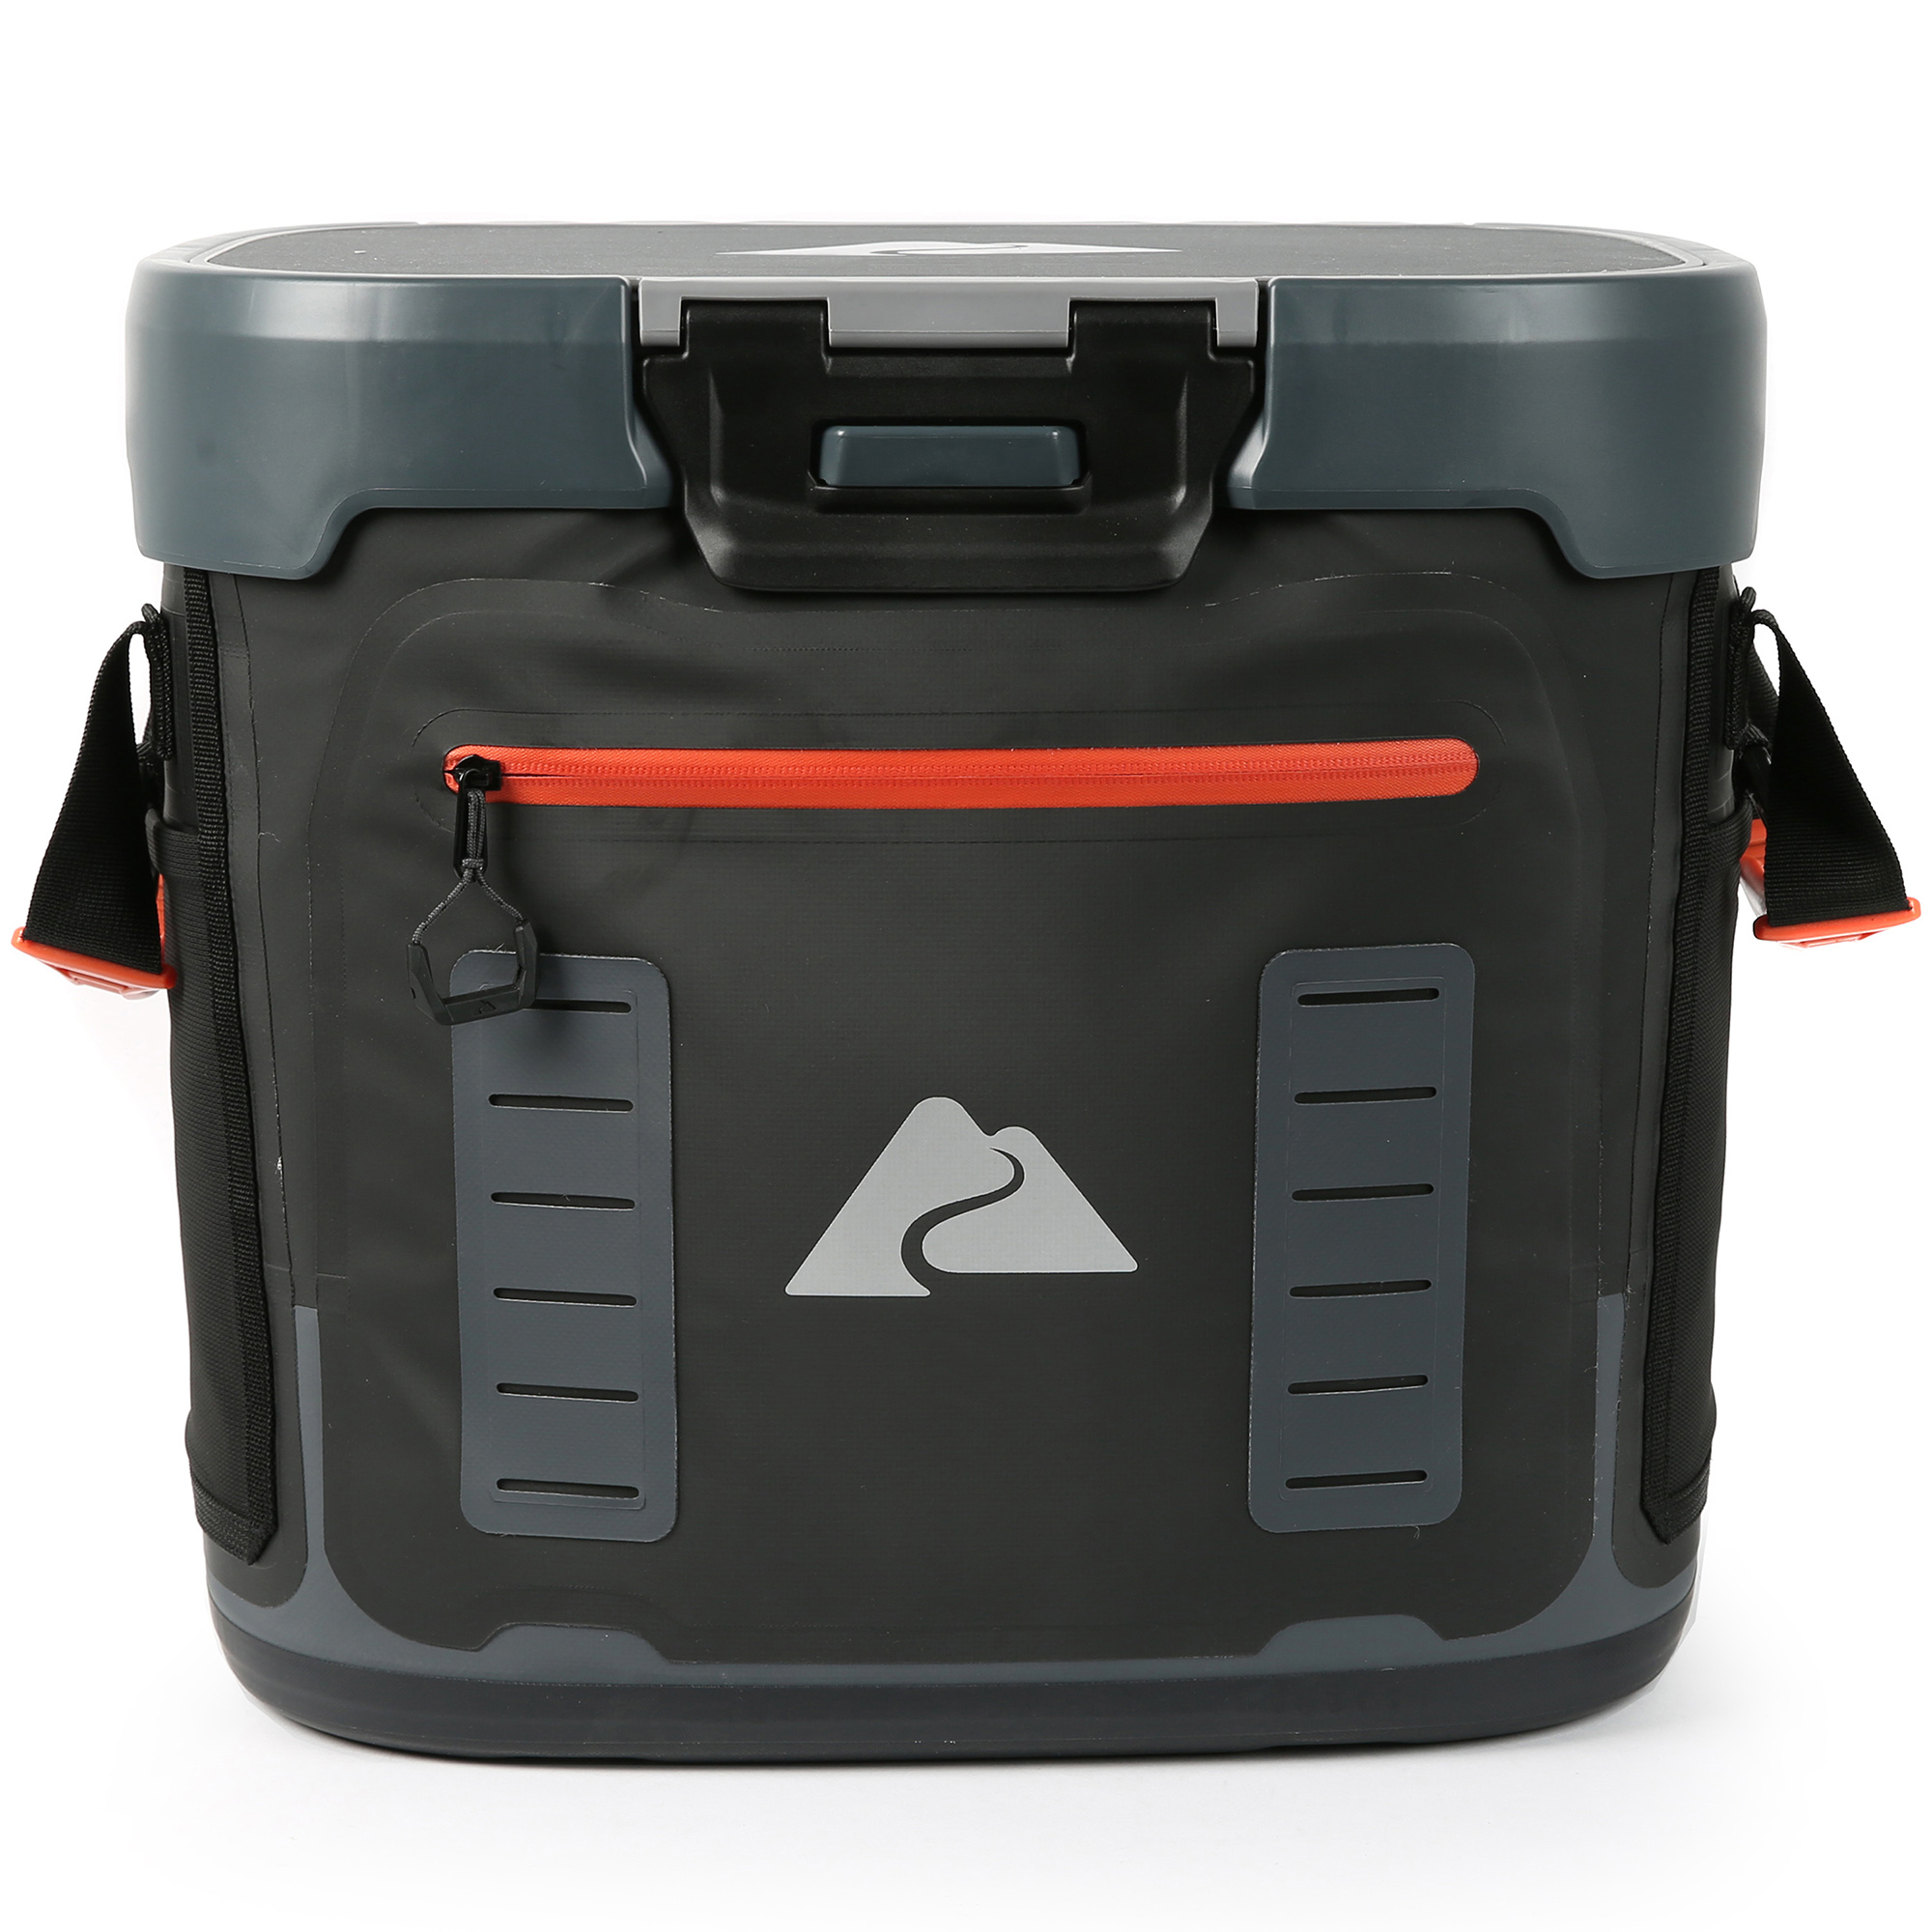 Ozark Trail 36 Can Welded Hard Sided Cooler, Gray/Black - image 1 of 8